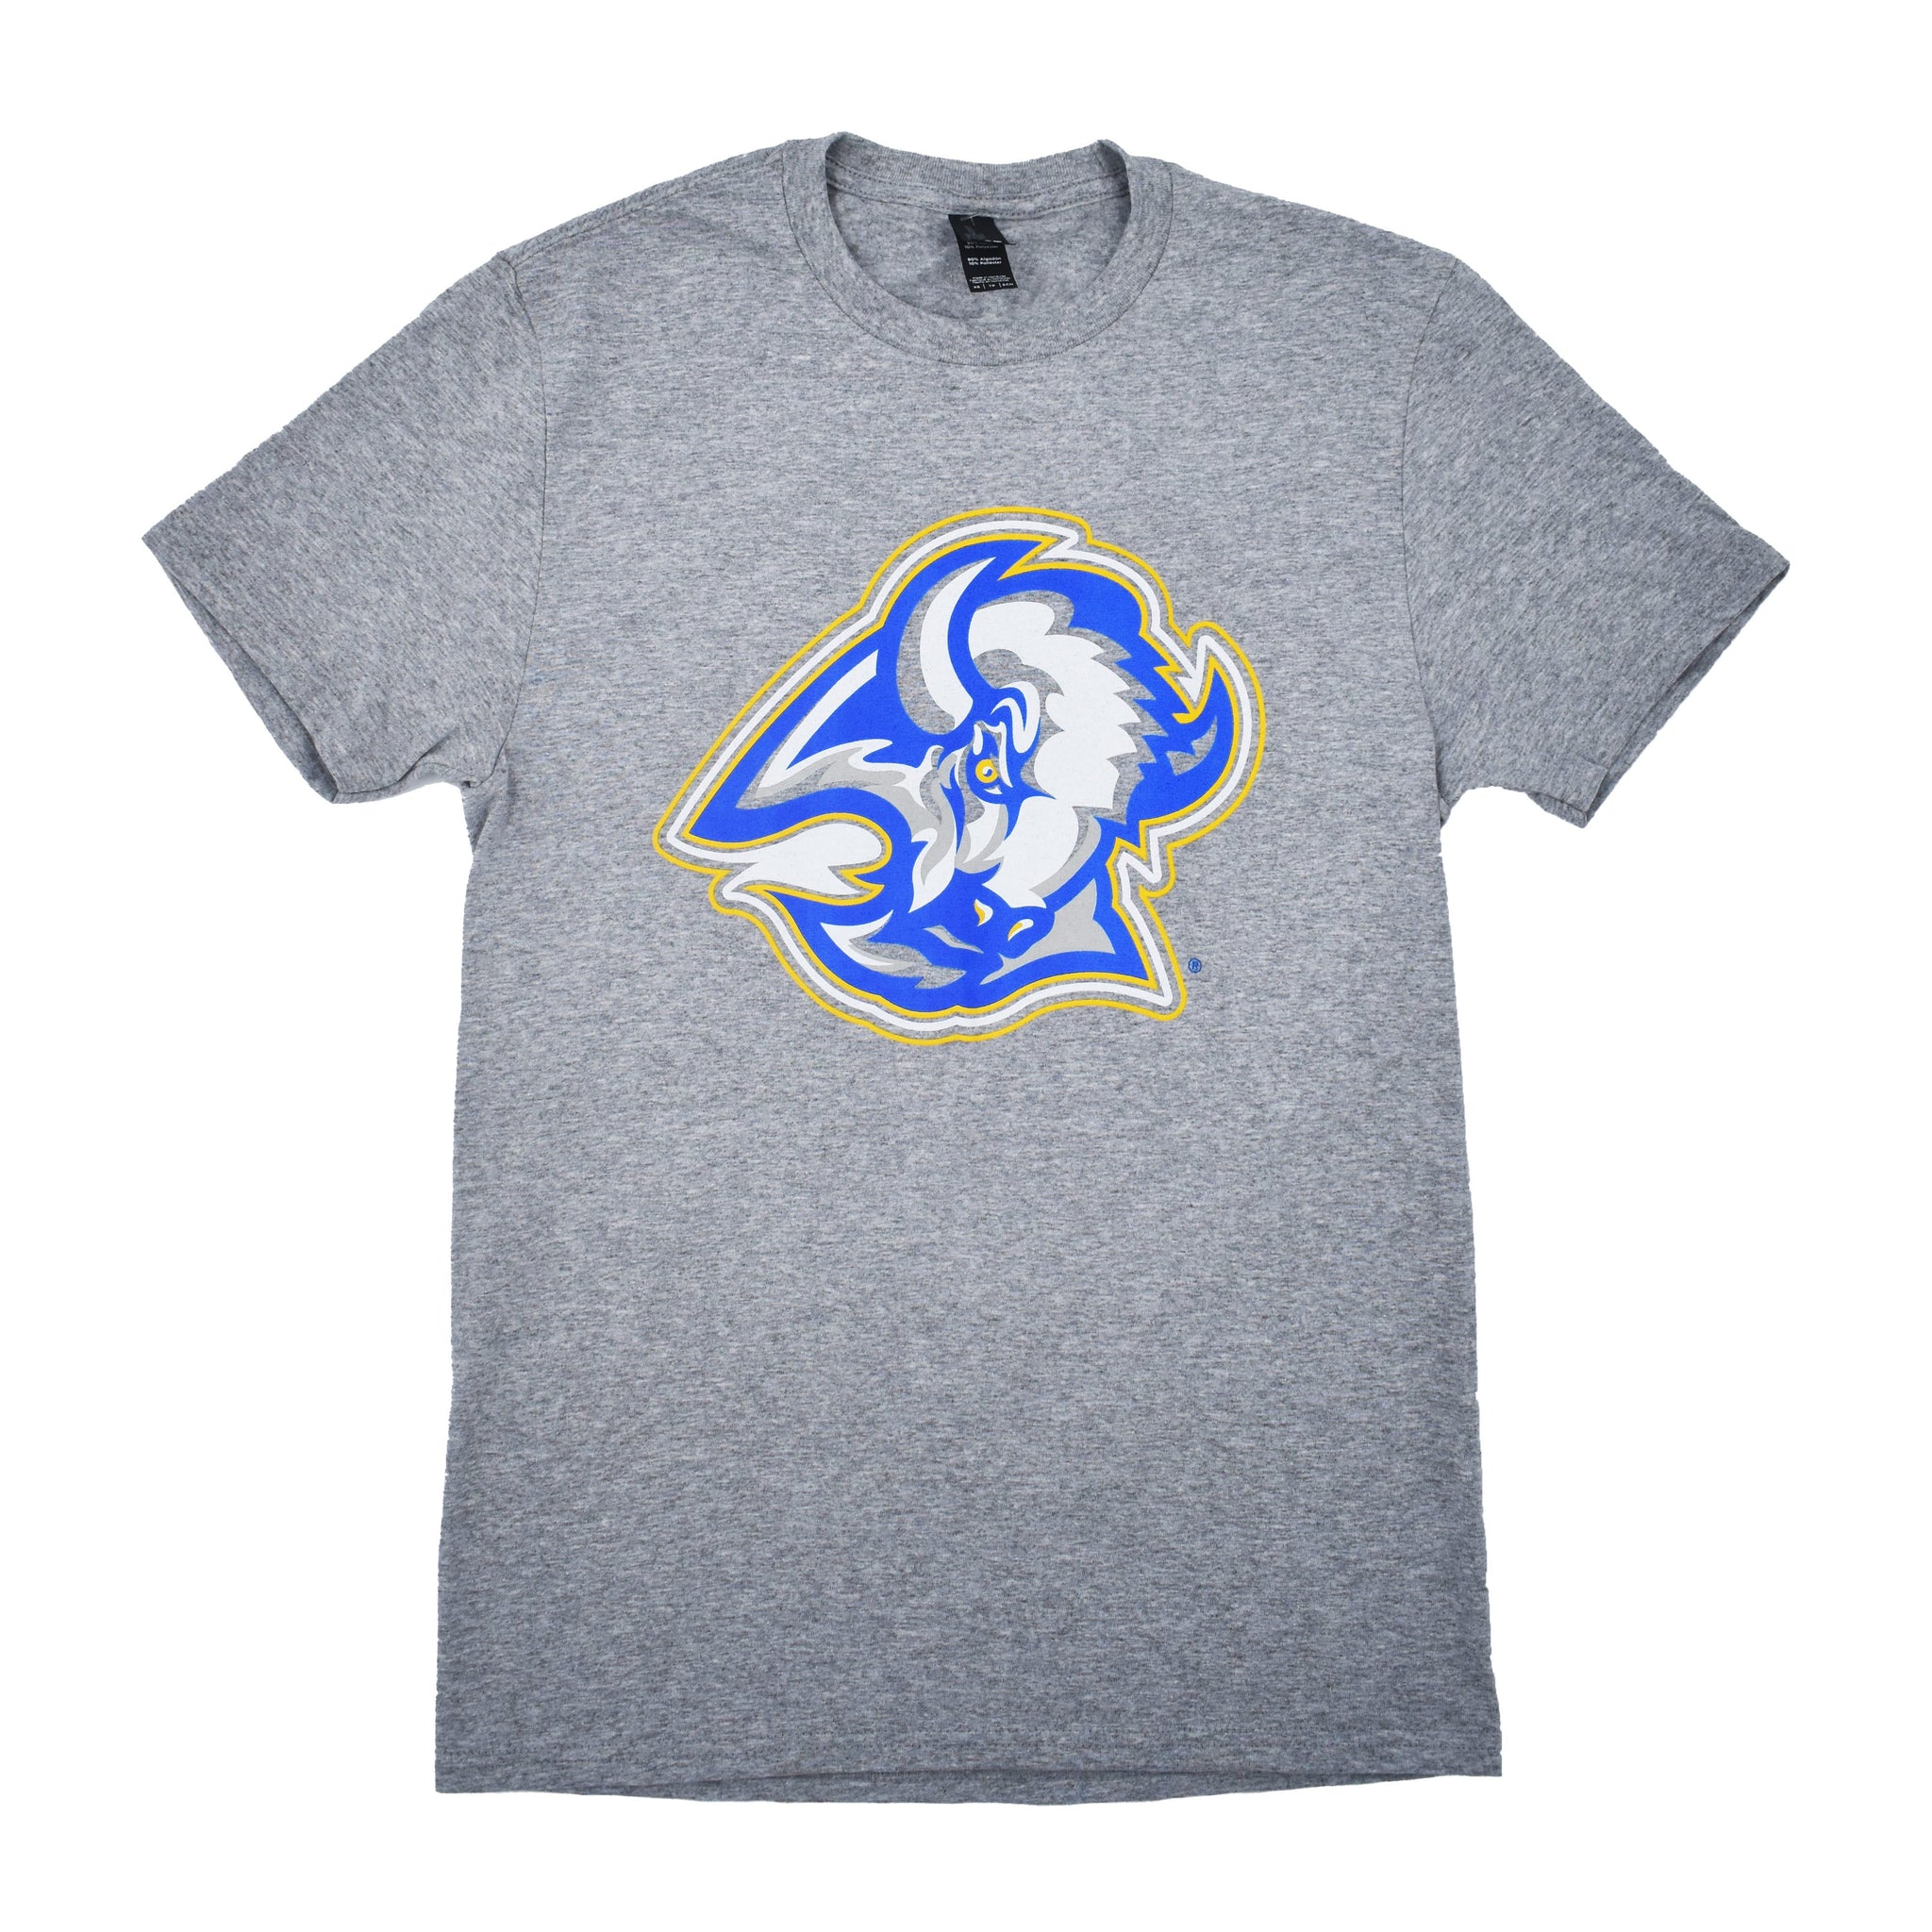 bflo store buffalo sabres blue and gold goat head heather grey short sleeve shirt